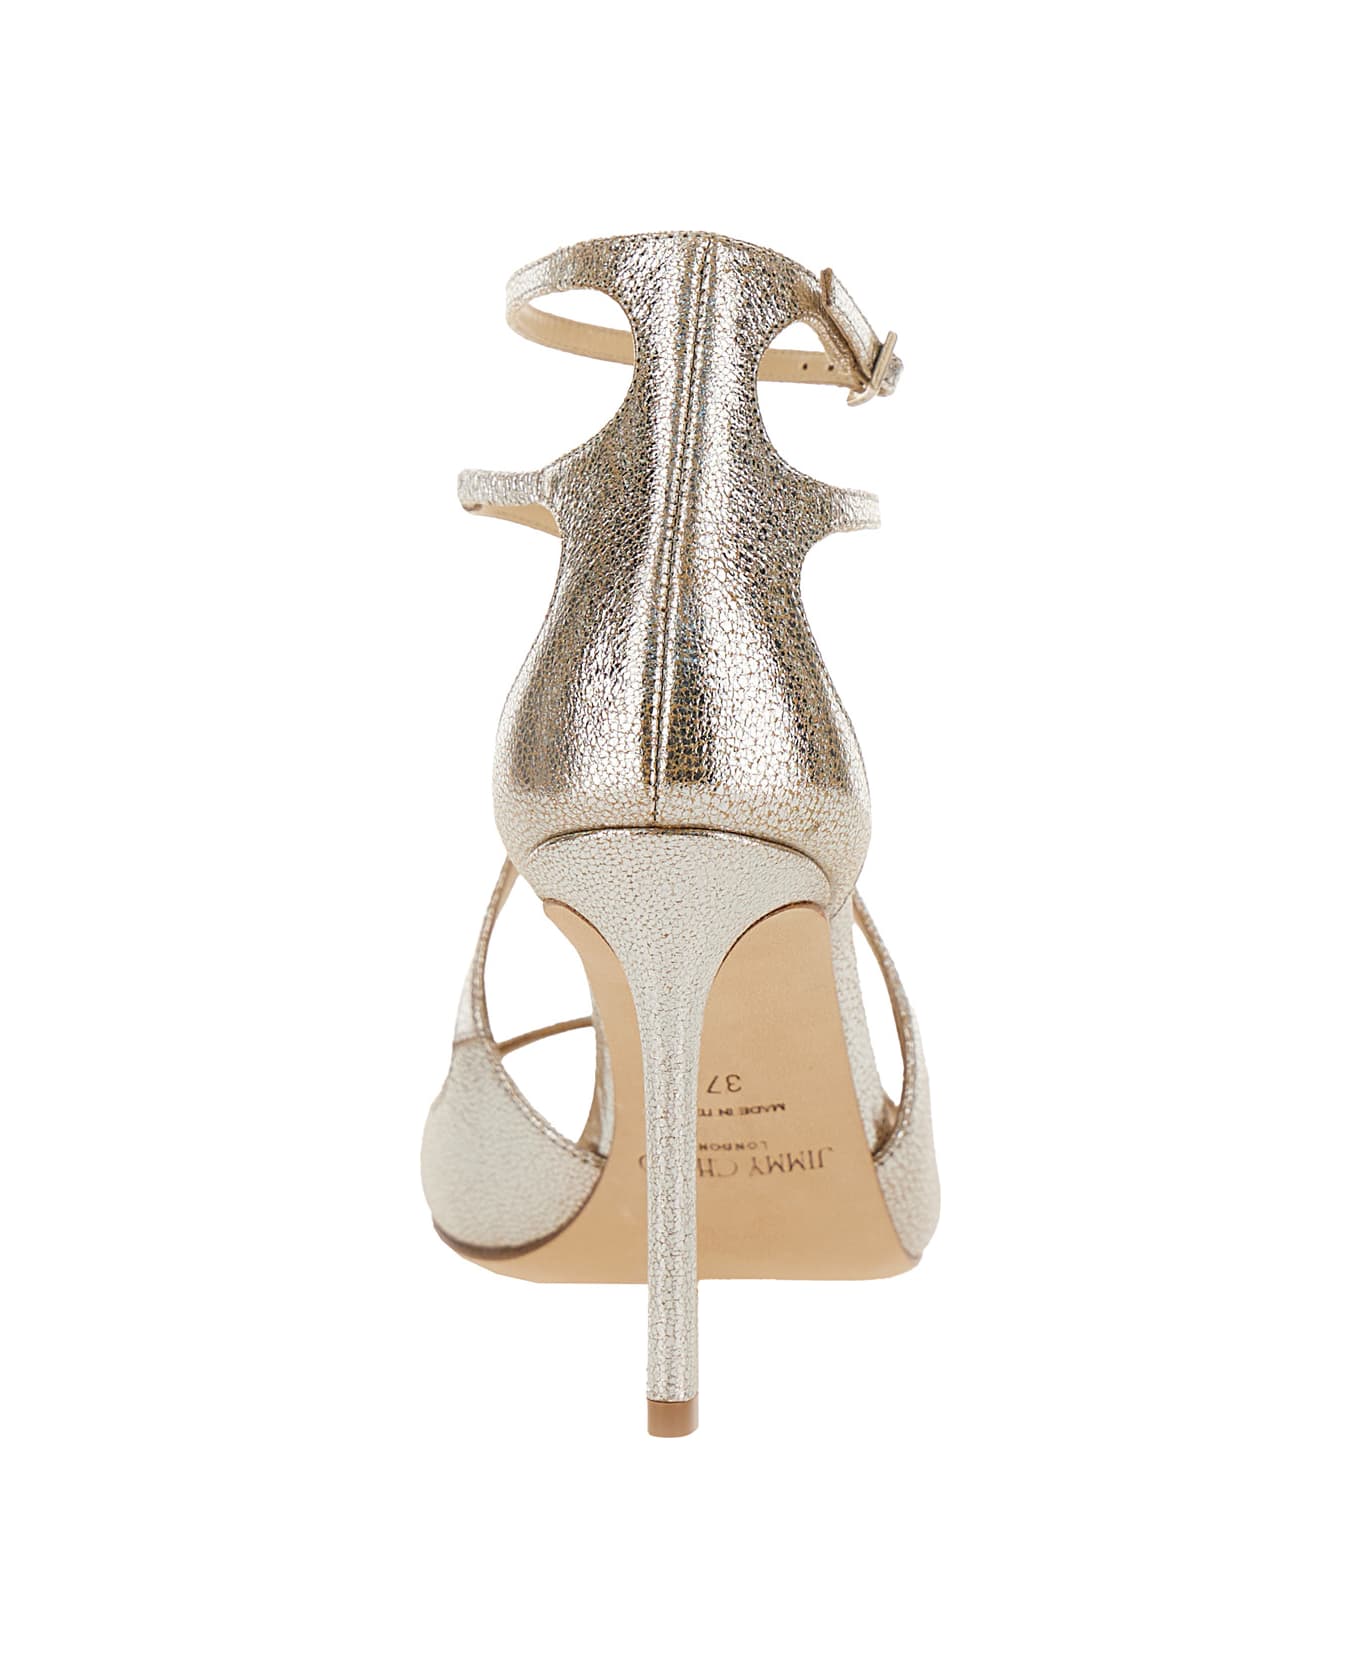 Jimmy Choo 'azia' Champagne Sandals With Strap And Squared Toe In Laminated Leather Woman - Metallic